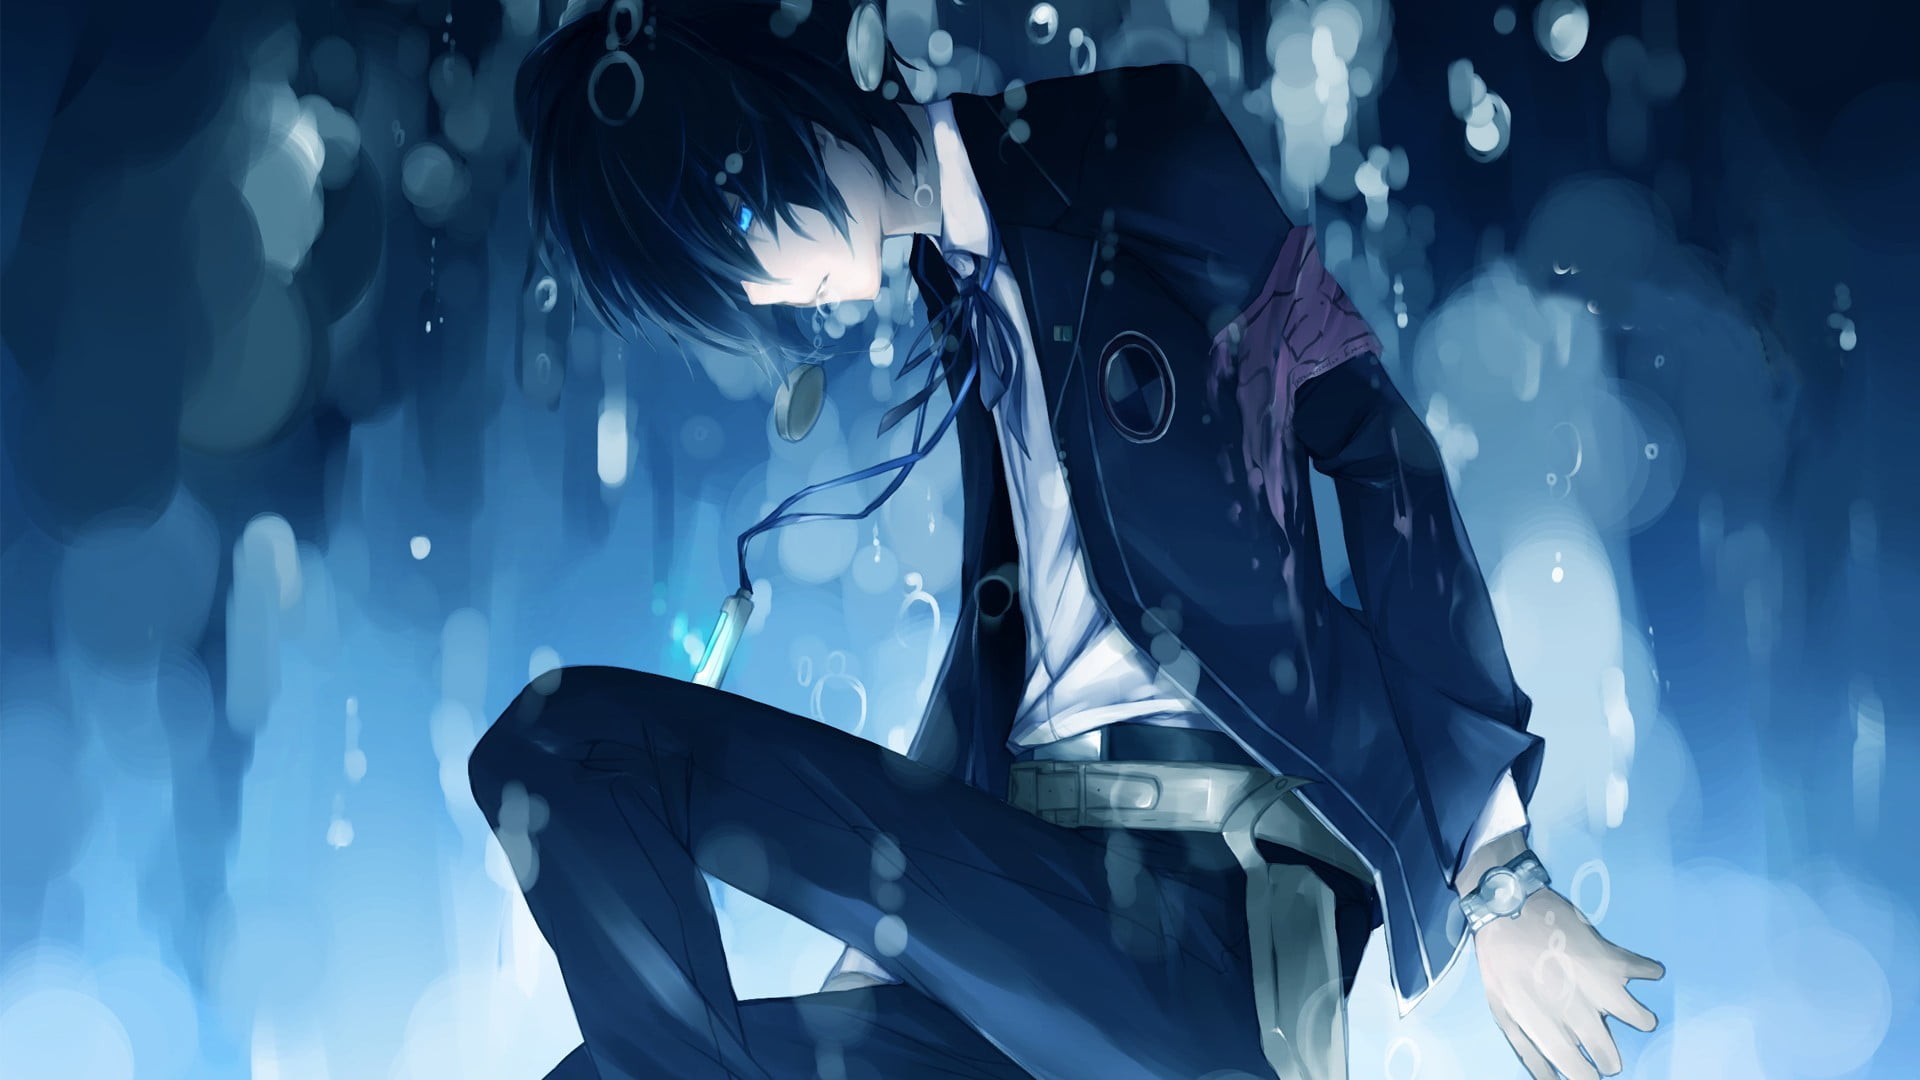 black haired guy anime character, manga, Persona series, one person